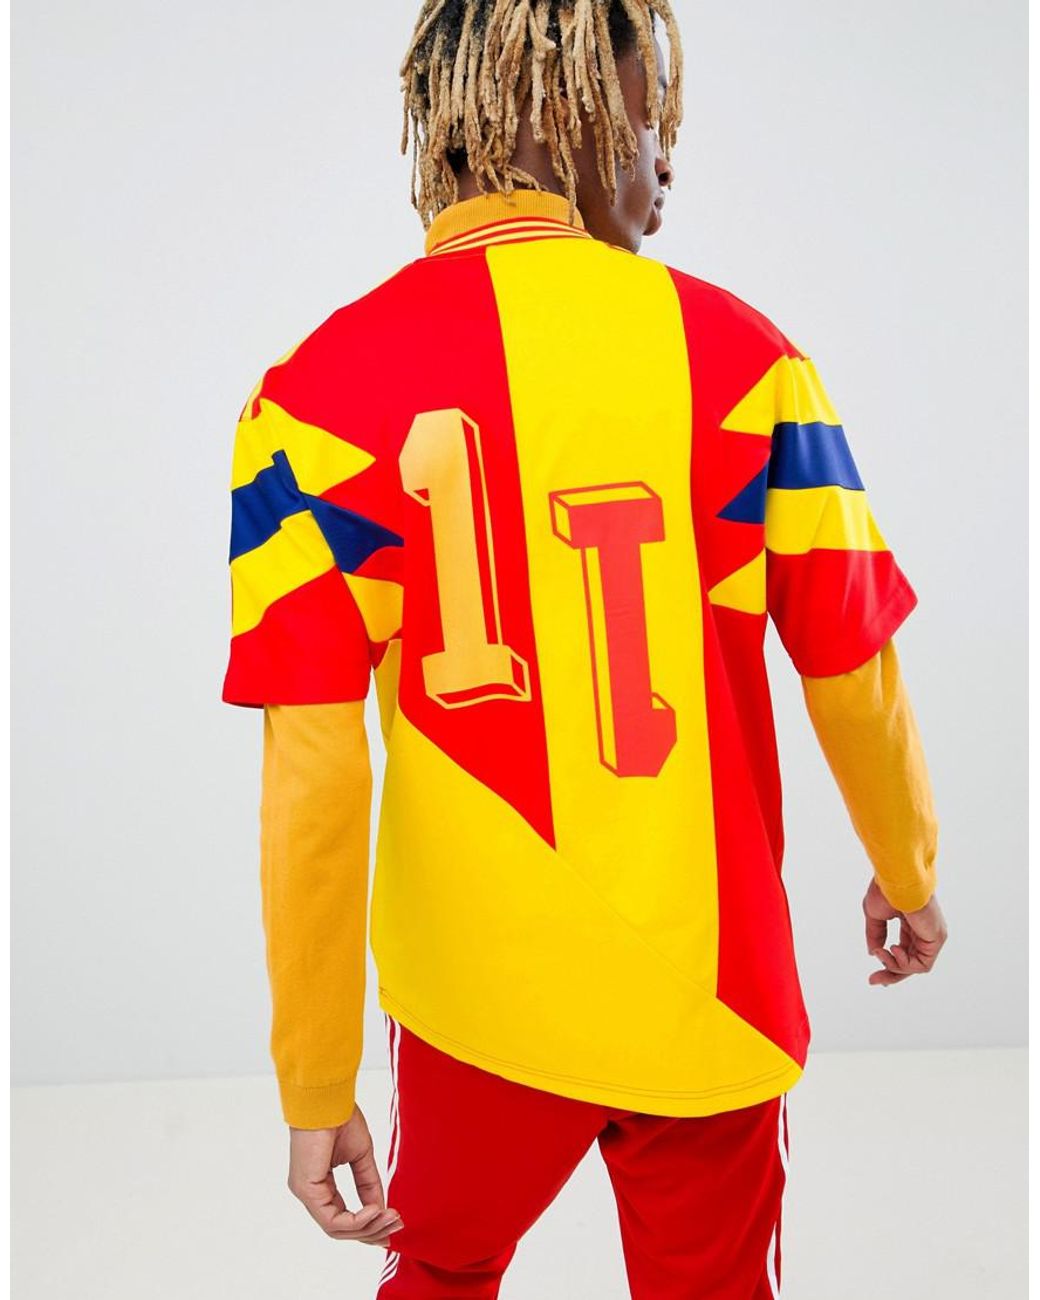 Official Colombia Soccer Jersey & Apparel